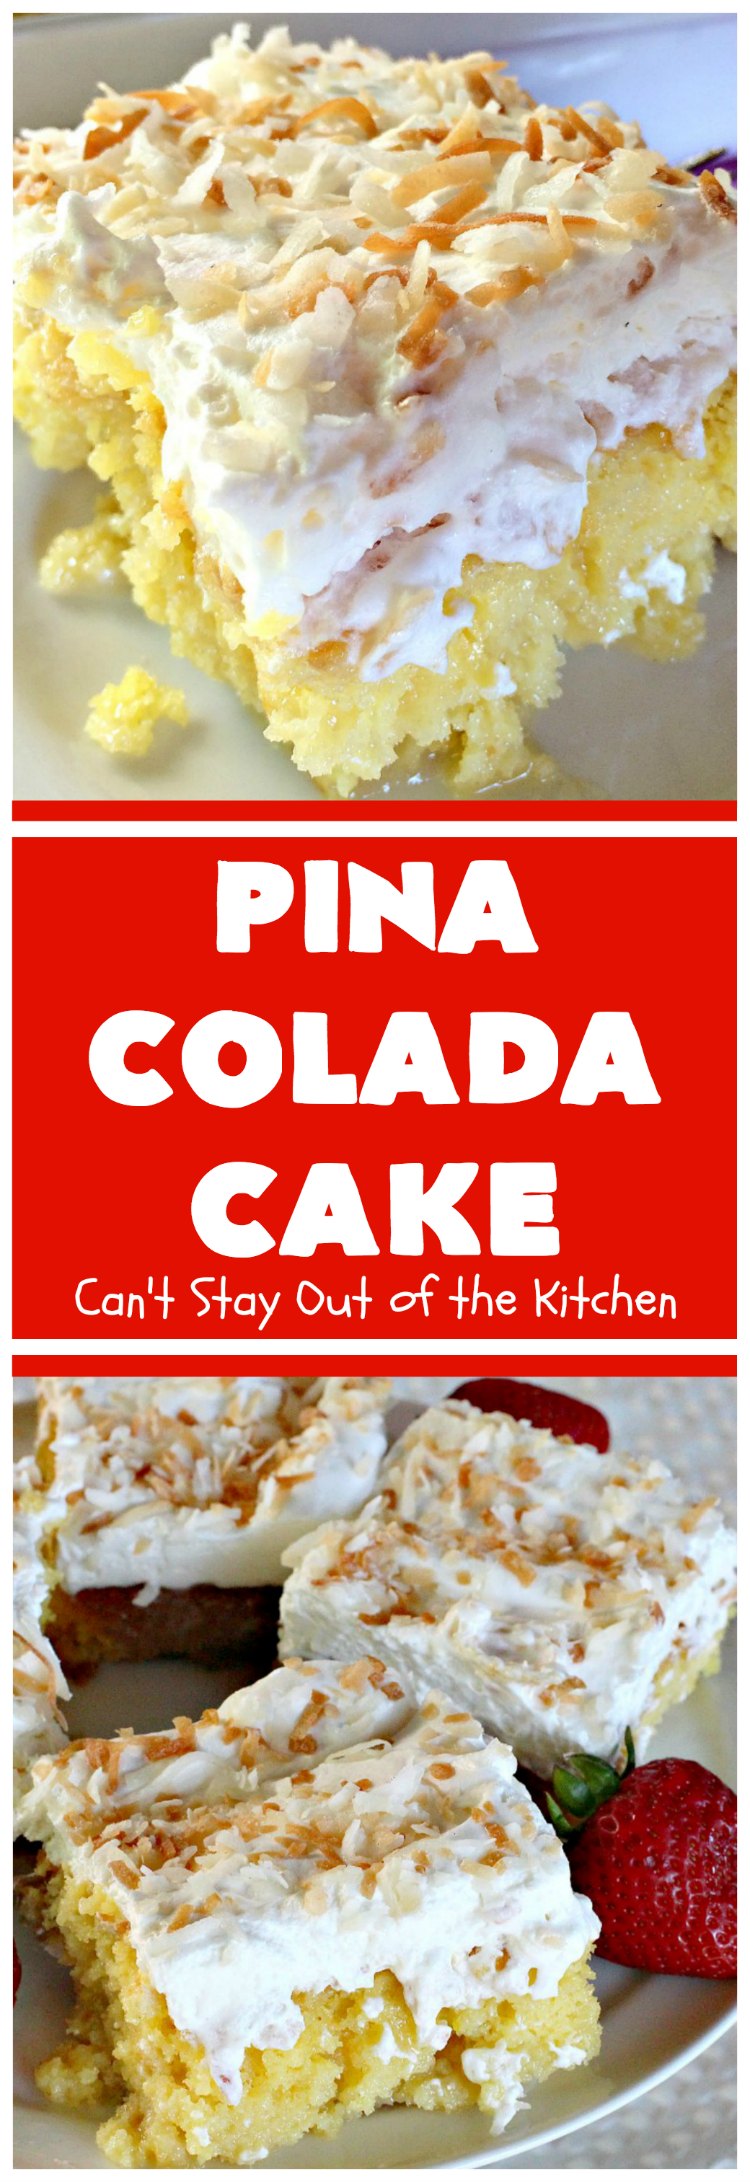 Pina Colada Cake | Can't Stay Out of the Kitchen